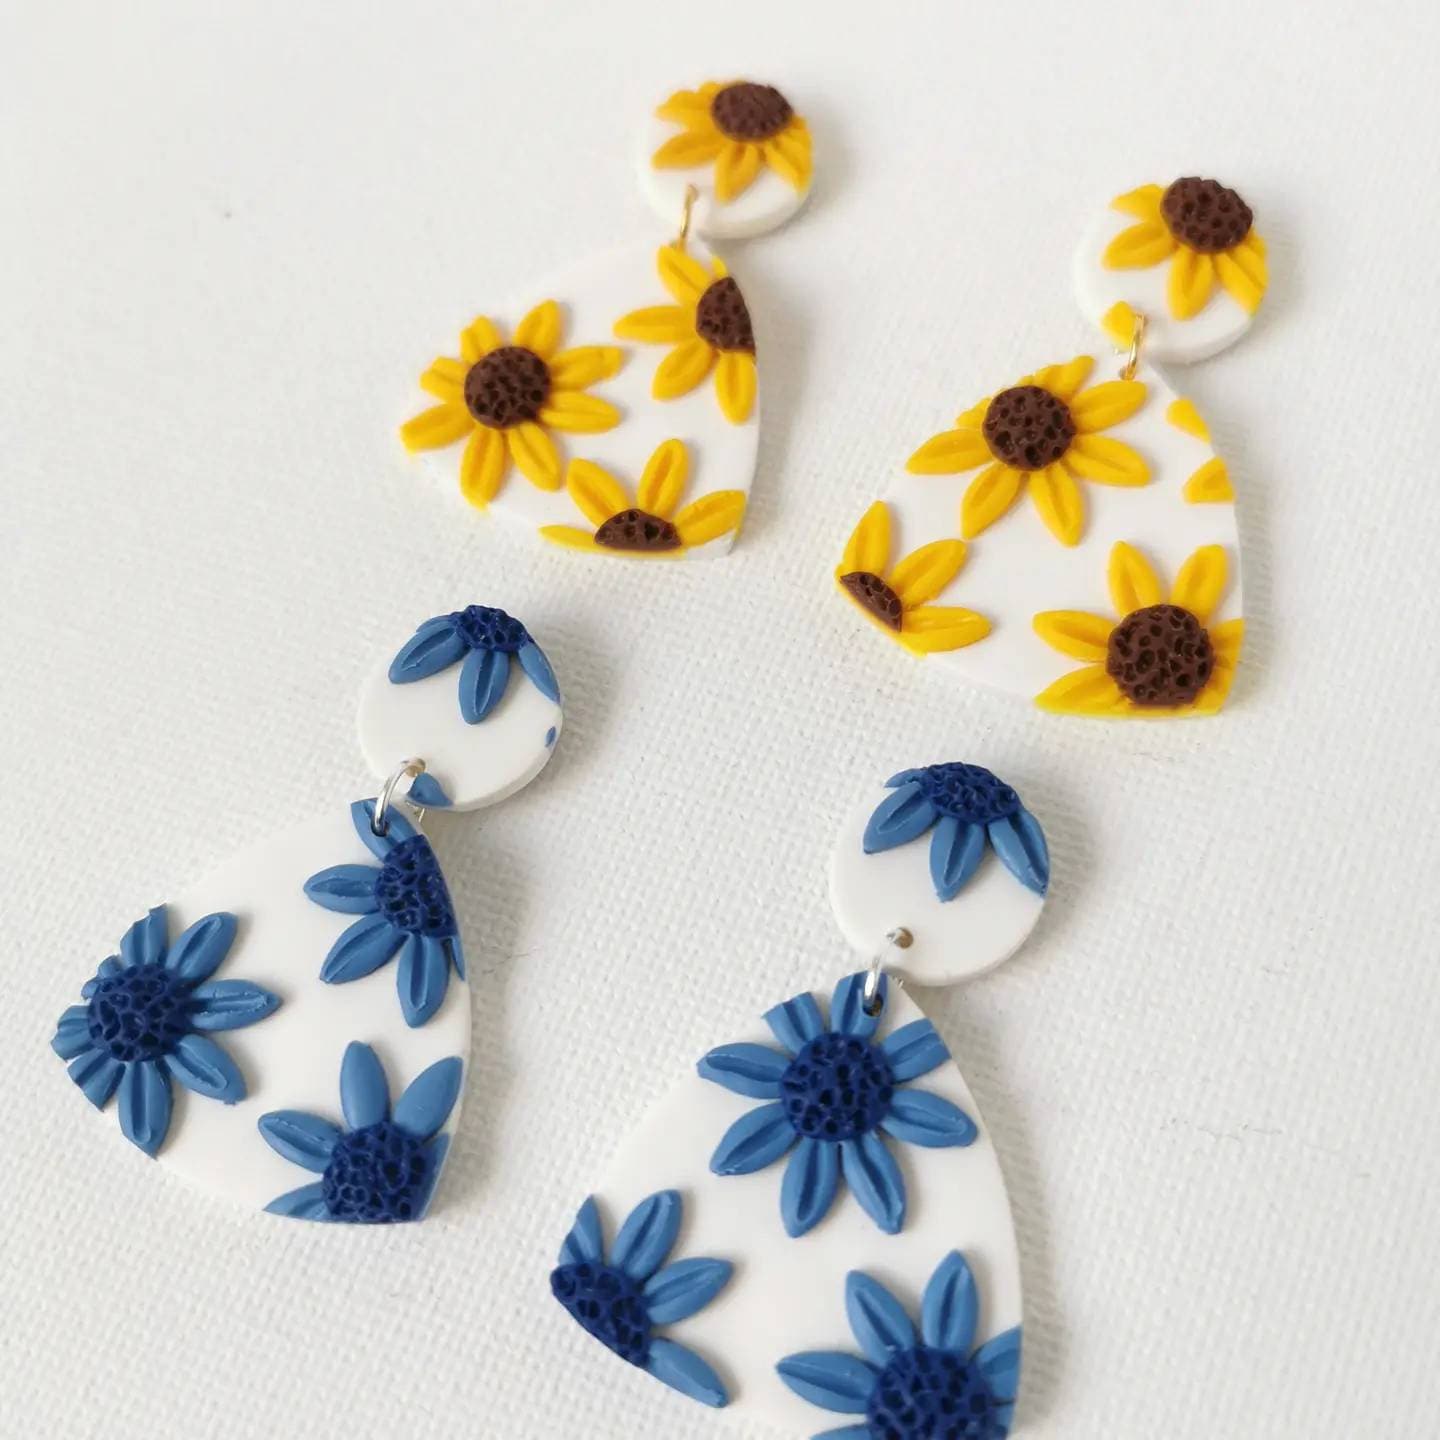 Sunflower Statement Floral Clay Earrings, Mexican Style Fiesta Jewelry,  Colorful Ethnic Floral Earrings, Embroidery Polymer Clay Dangles 